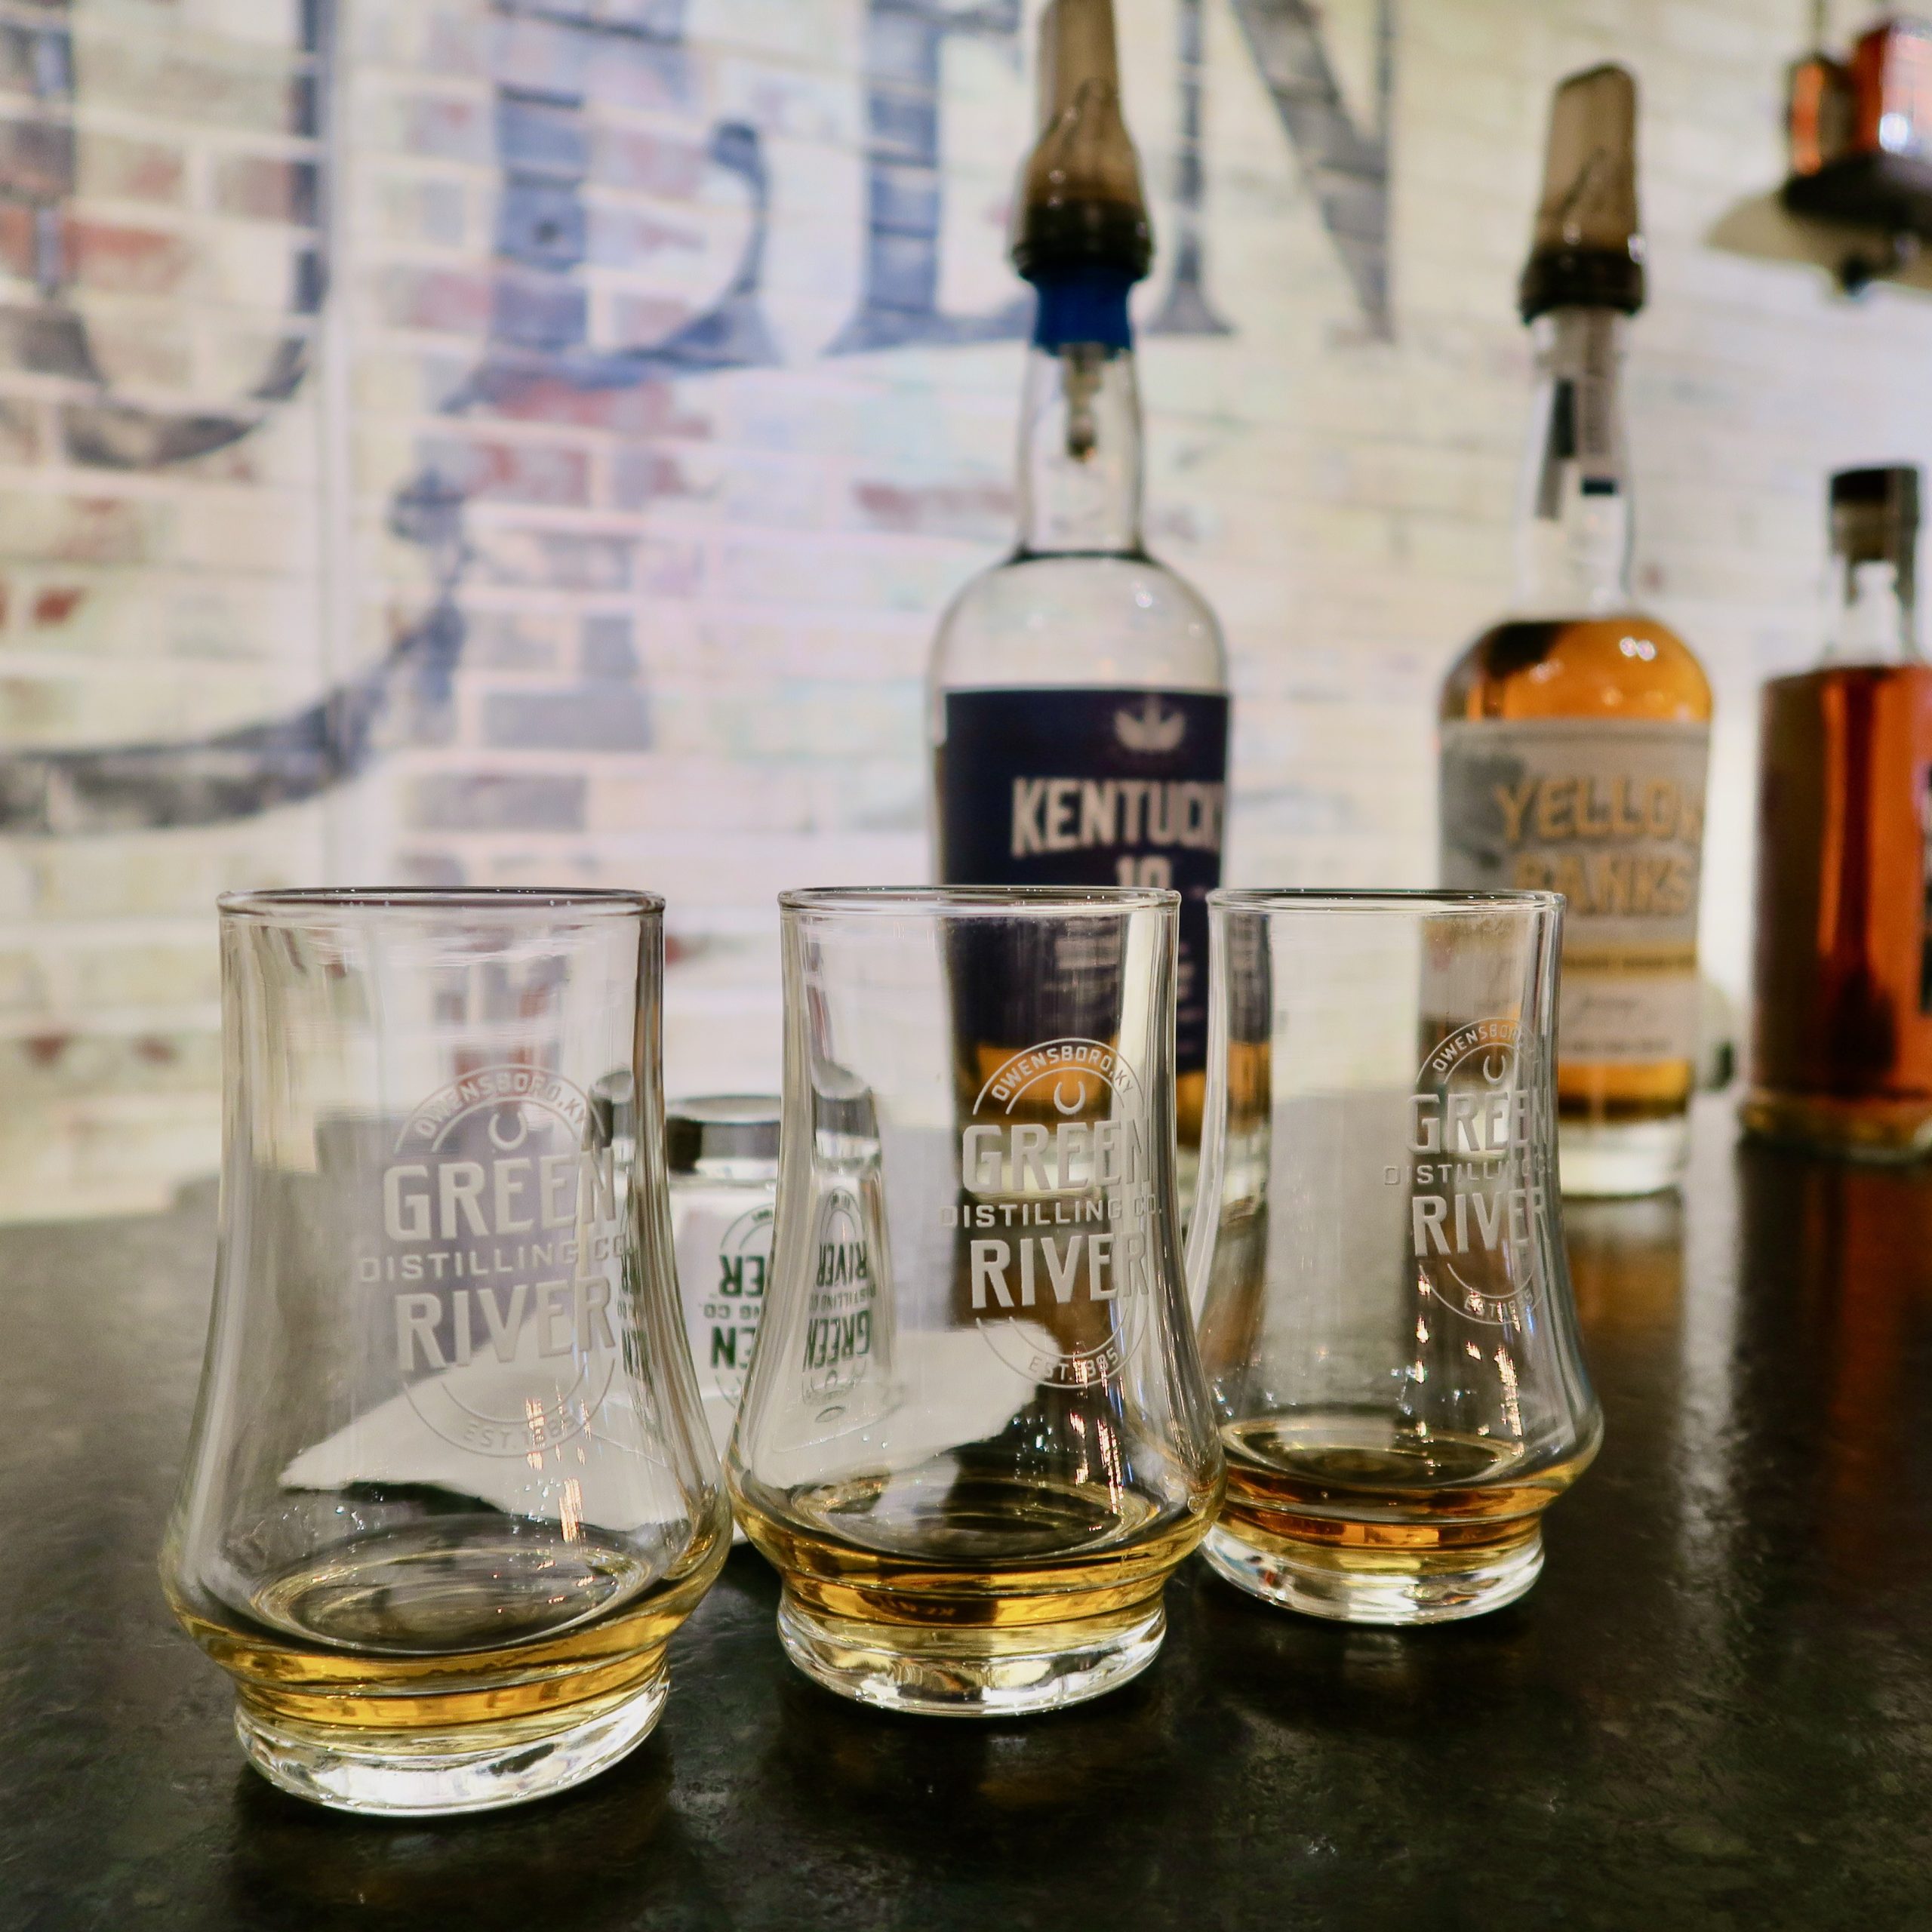 green_river_distilling1_add_owensboro_kentucky_to_your_vacation_list-1471826